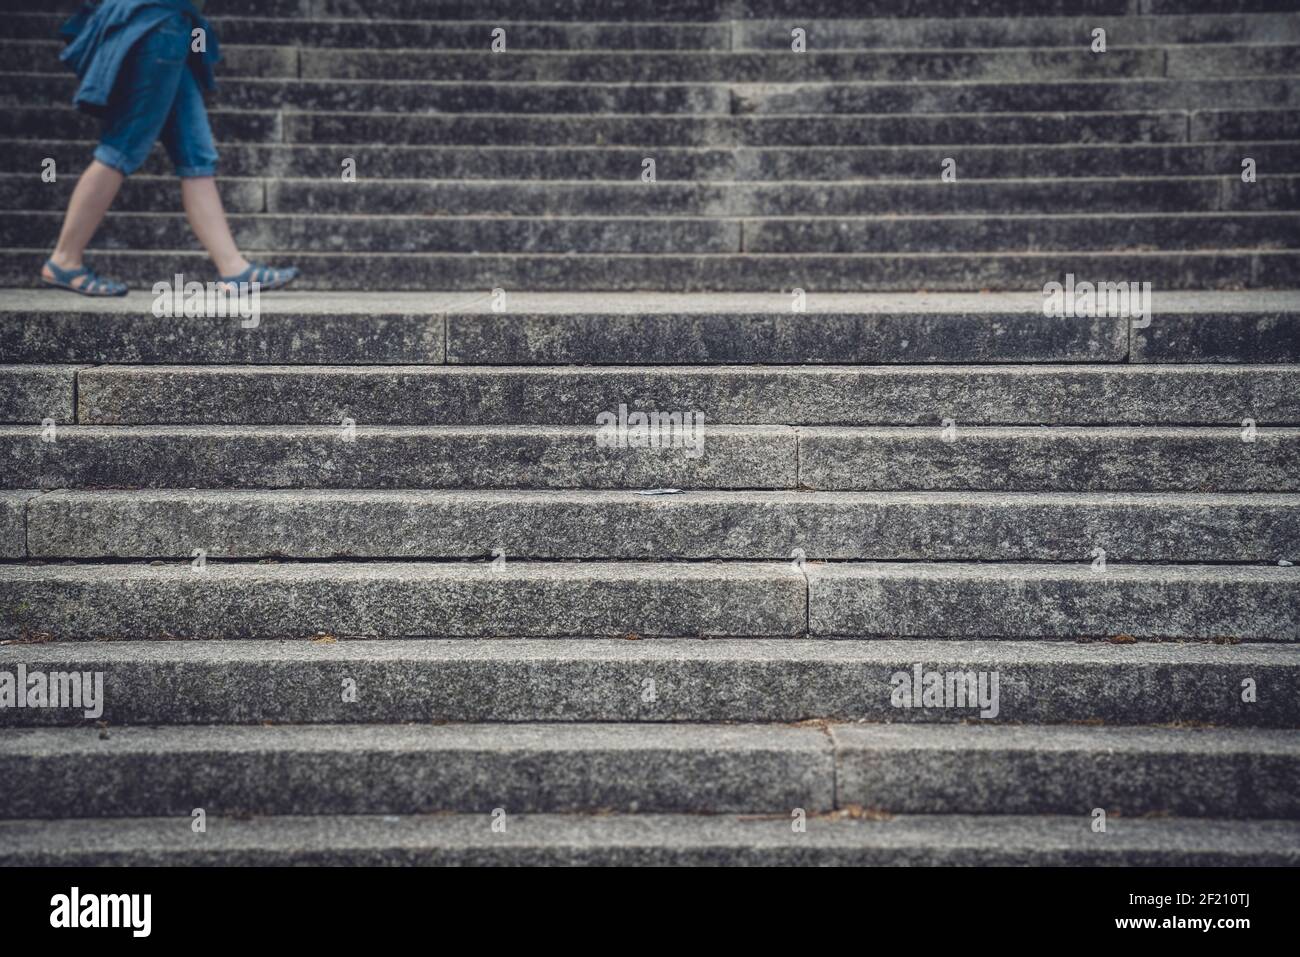 Legs of a woman walking between concrete stairs Stock Photo